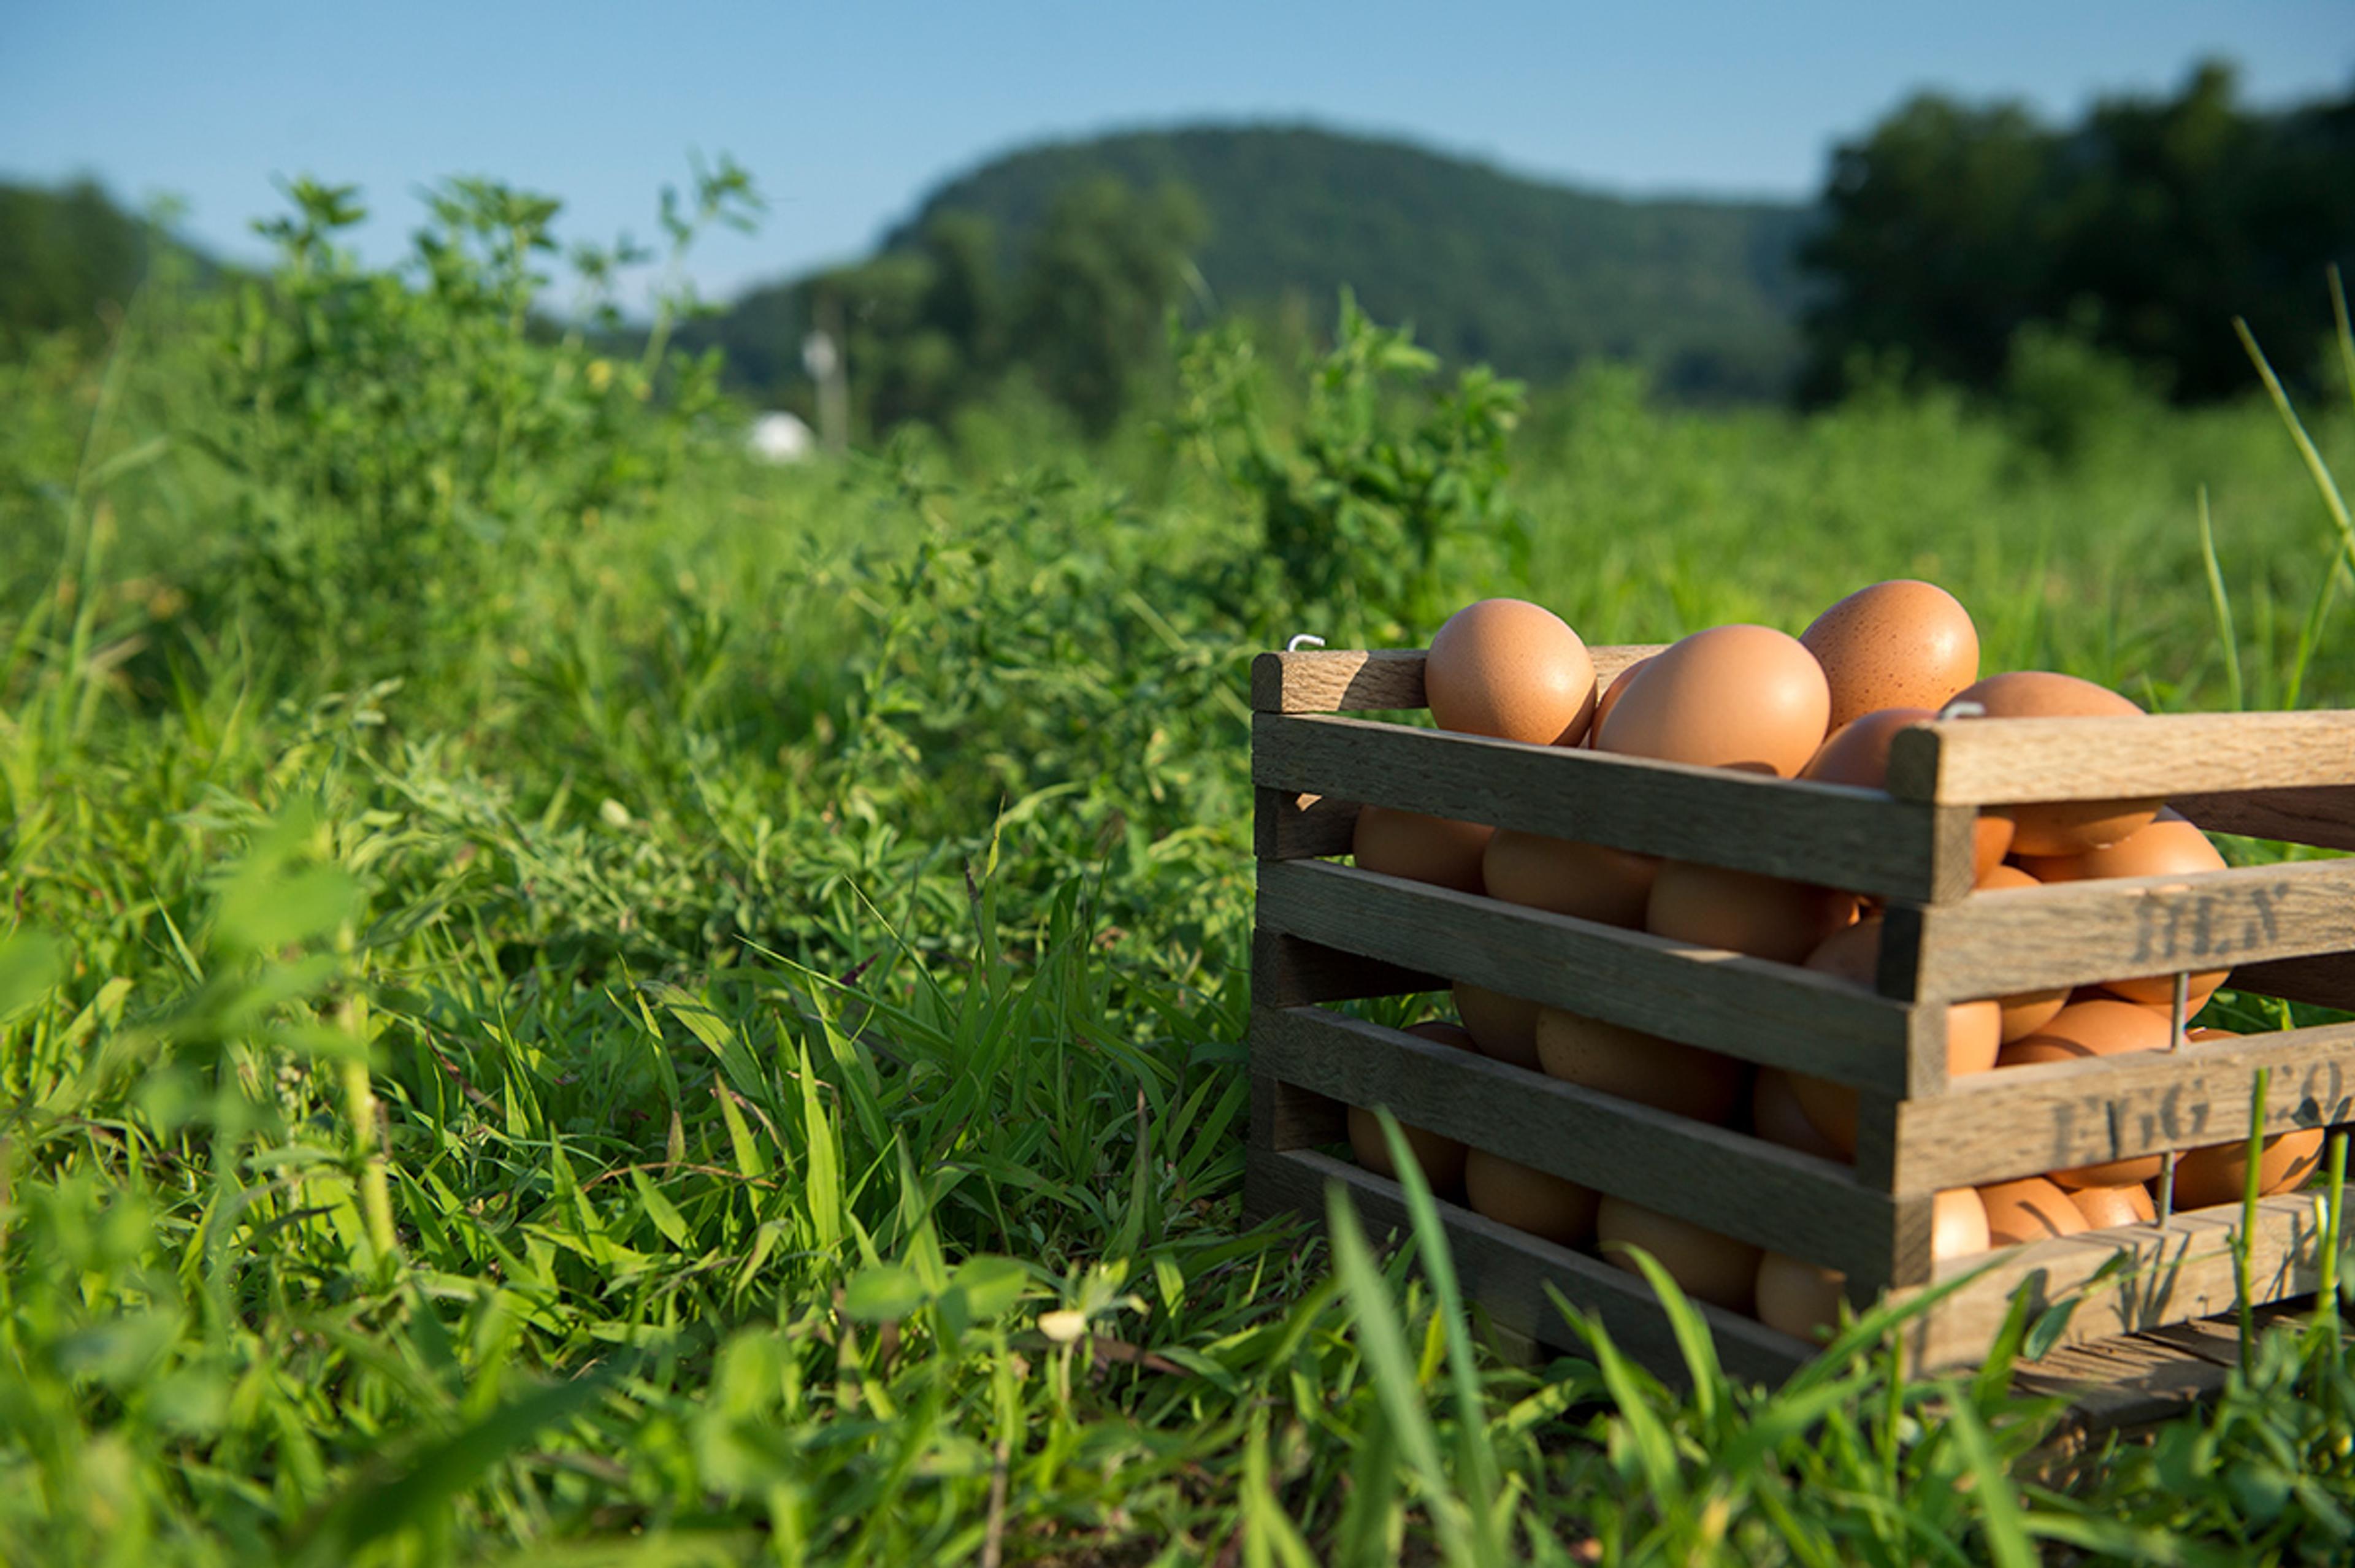 A crate of brown eggs sitting artfully in green grass against a blue sky. 